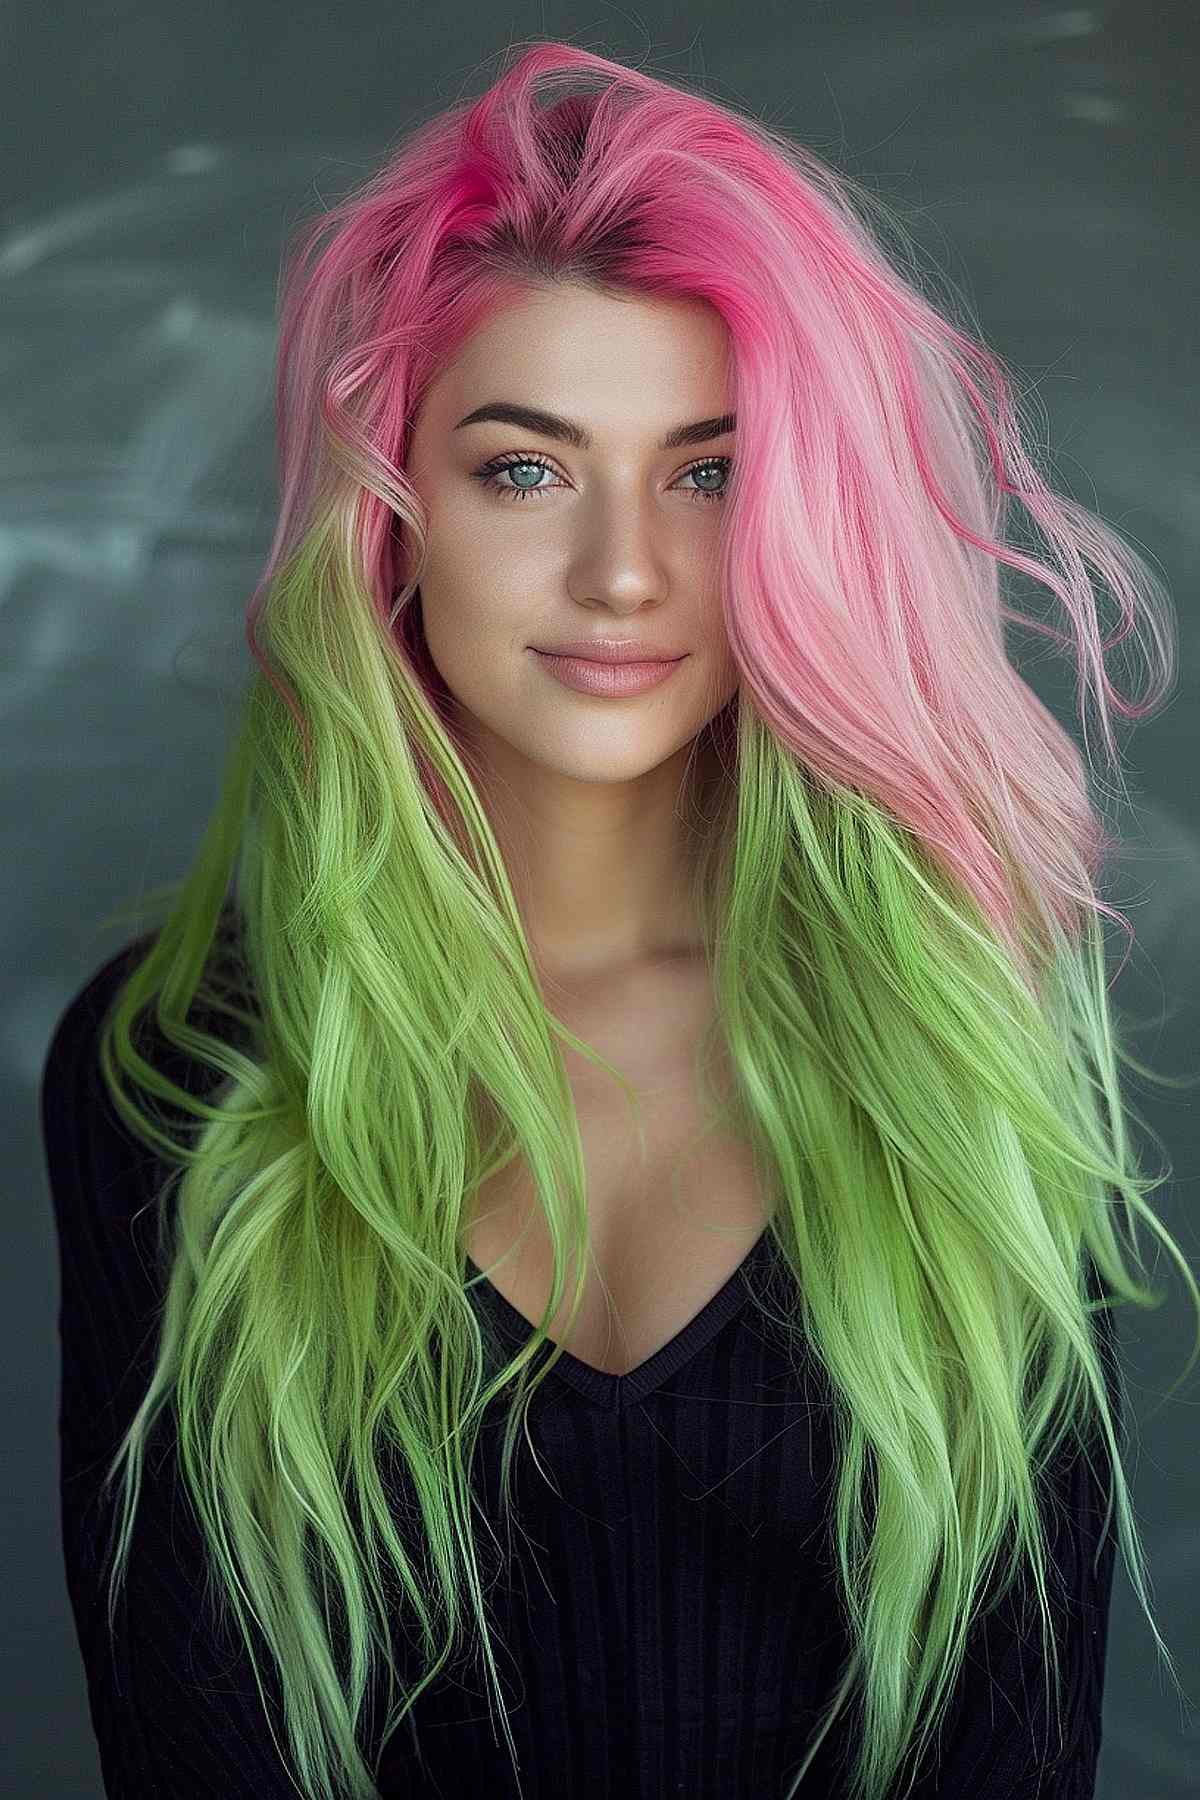 A young woman with long, layered hair beautifully transitioning from pink at the roots to green at the tips, embodying a vibrant watermelon-inspired look.